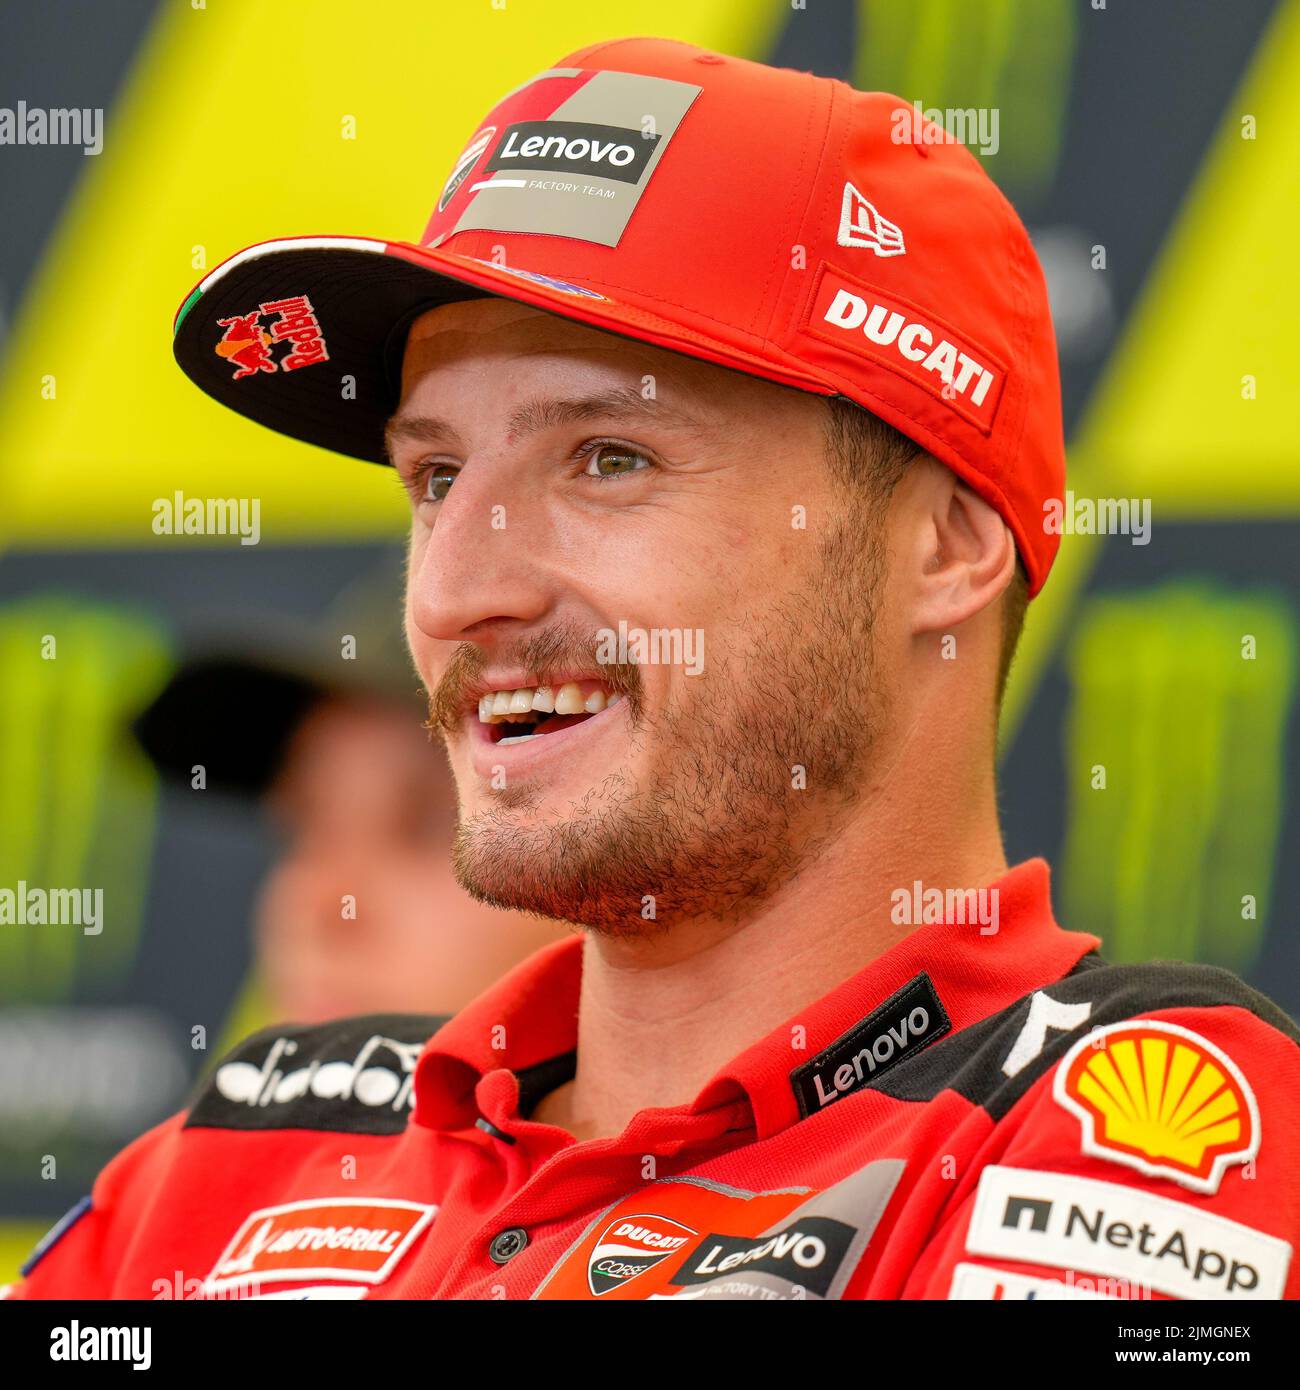 Towcester, UK. 06th Aug, 2022. Jack MILLER (Australia) of the Ducati Lenova Team during the 2022 Monster Energy Grand Prix Qualification Press Conference after securing third place on the grid at Silverstone Circuit, Towcester, England on the 6th August 2022. Photo by David Horn. Credit: PRiME Media Images/Alamy Live News Stock Photo